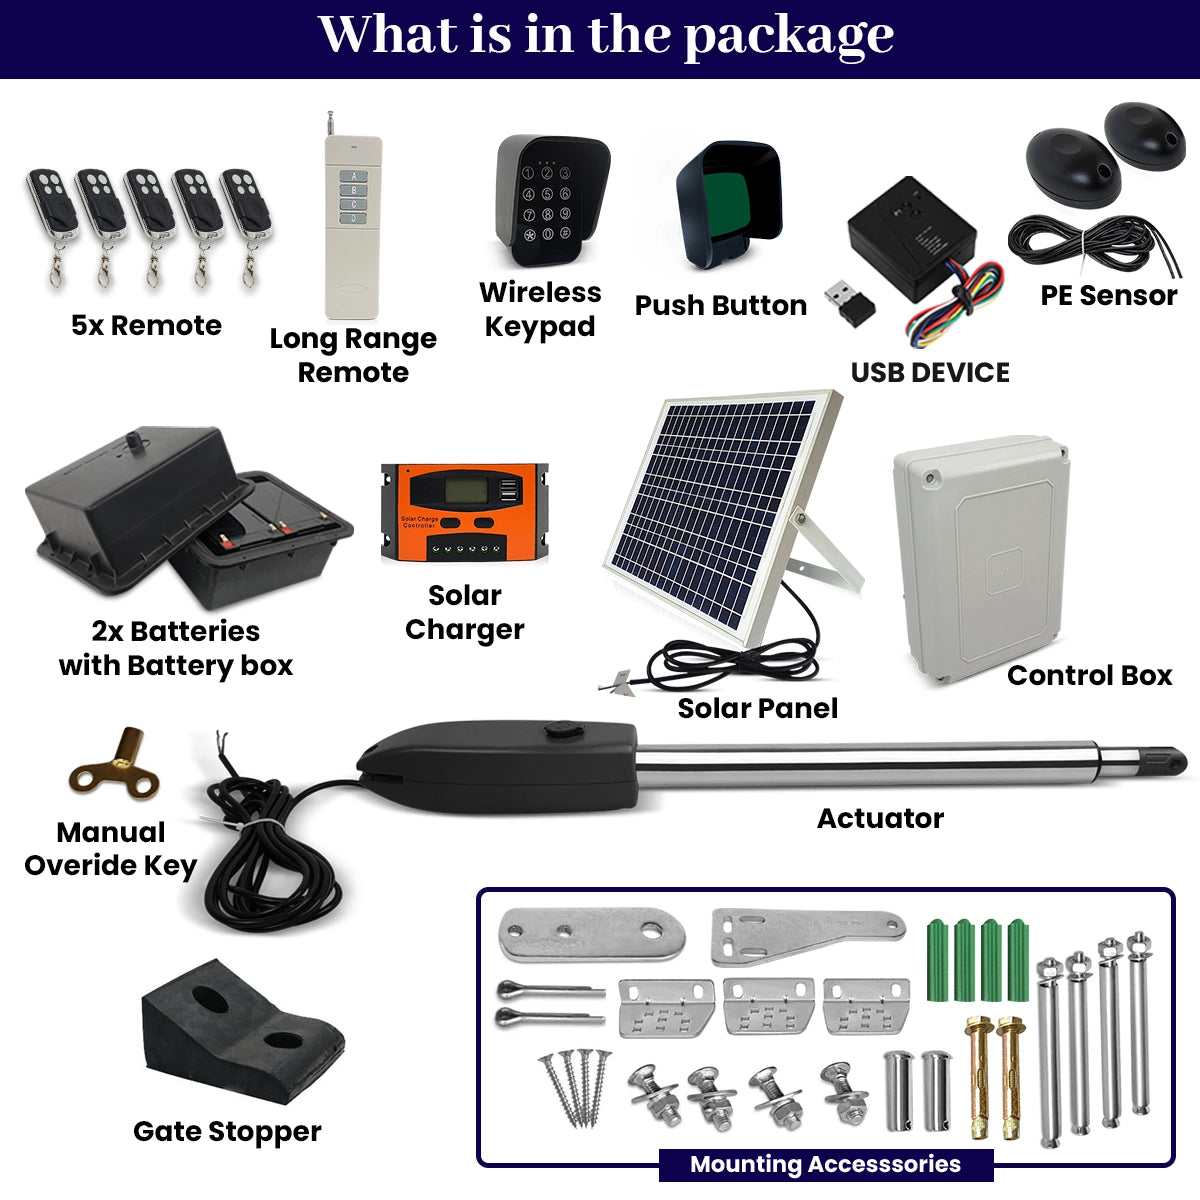 Full Solar Powered, Automatic, Single Swing, Gate Opener Kit, with USB Receiver , gatomate